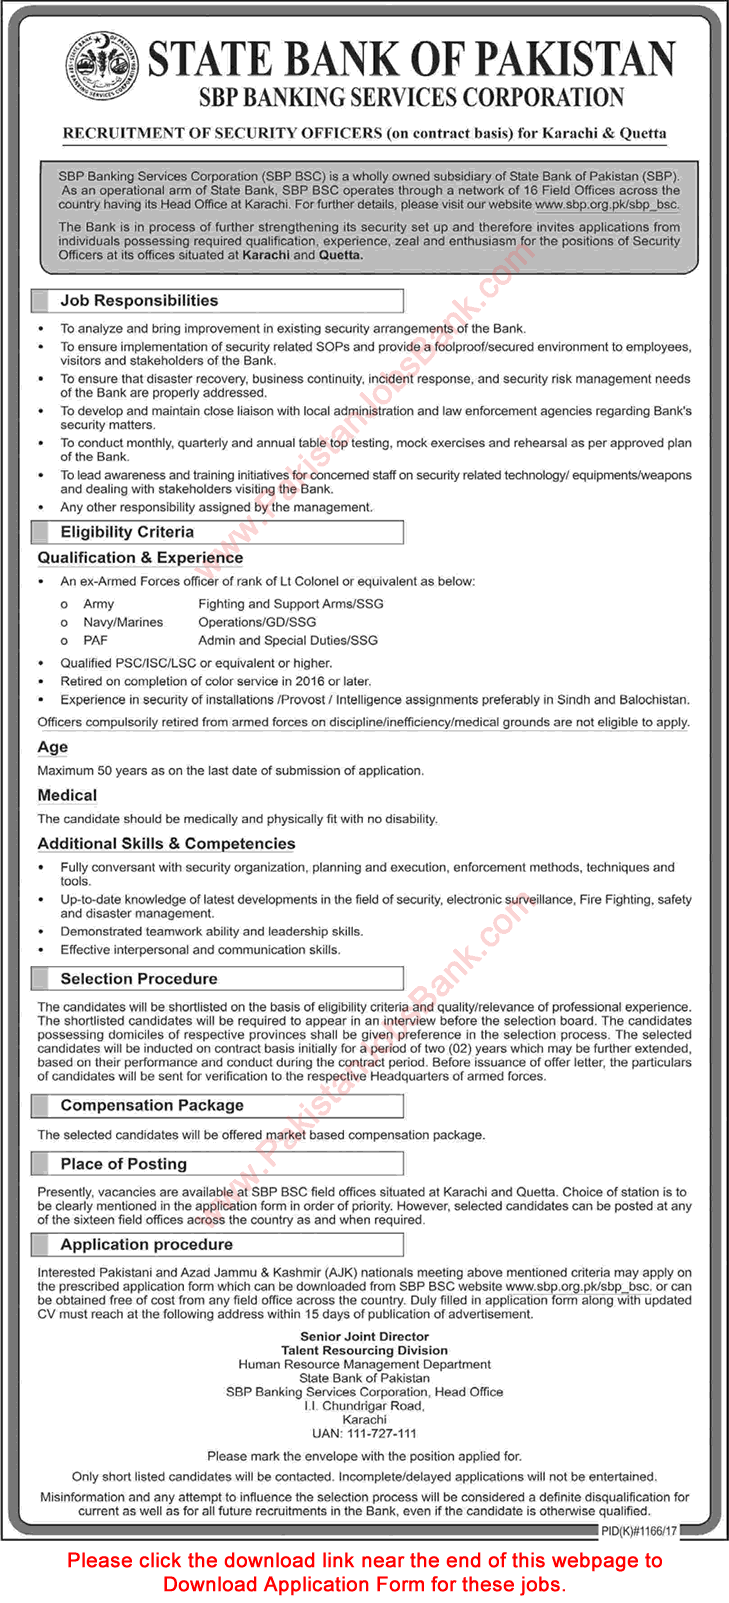 Security Officer Jobs in State Bank of Pakistan 2017 October Application Form Ex/Retired Army Personnel Latest